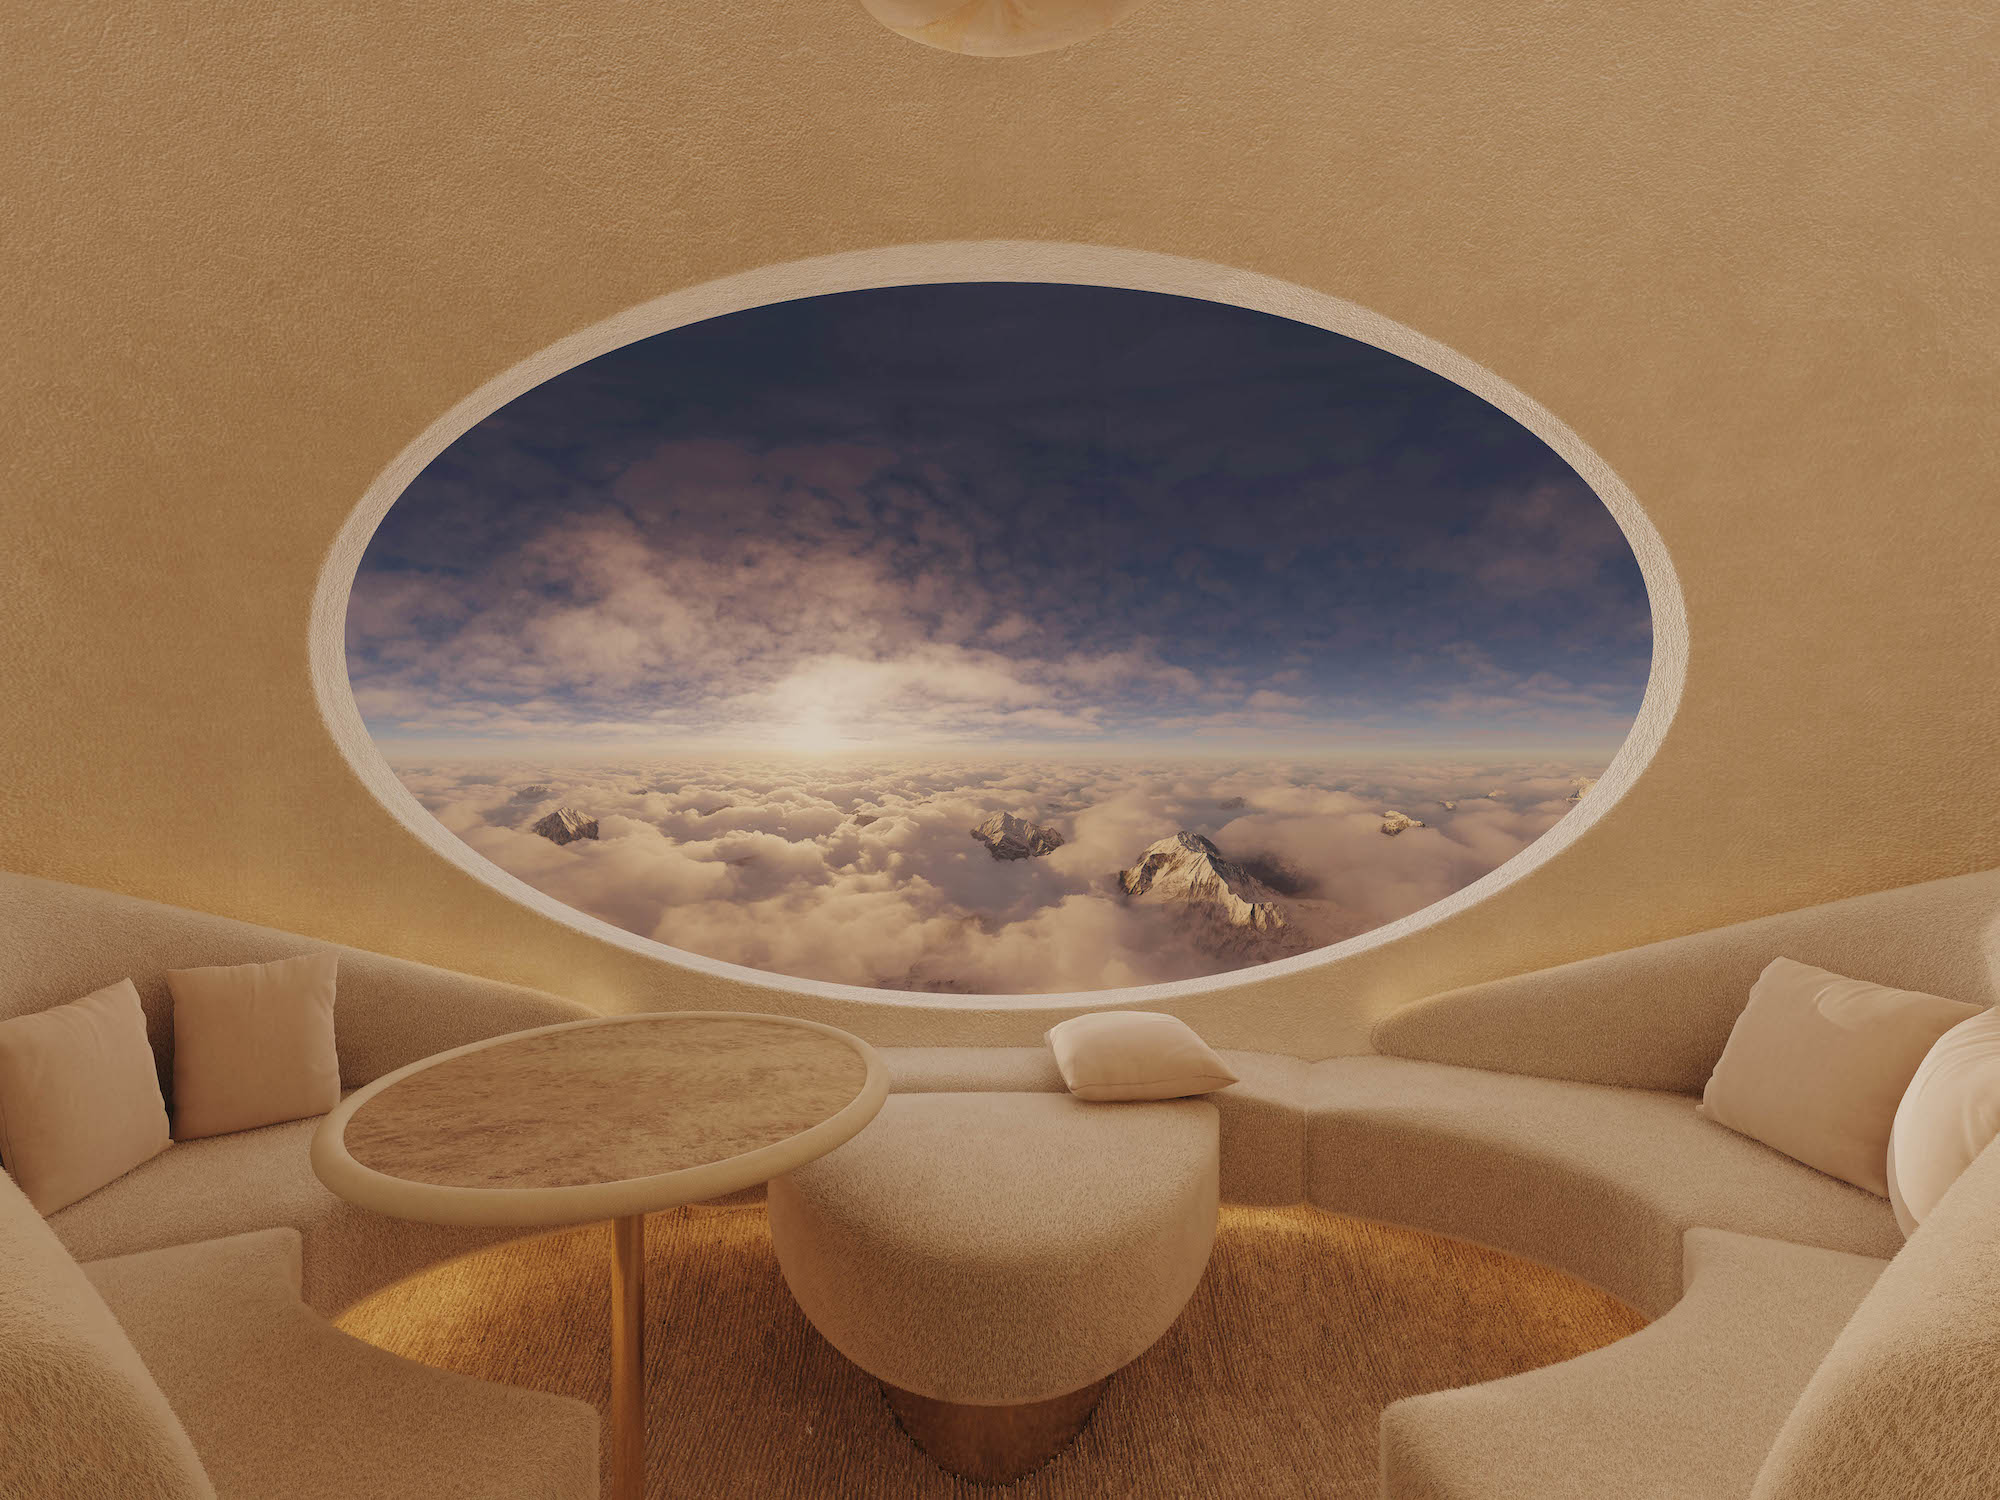 Guests can be served Michelin-starred cuisine while admiring the incredible views during the serene ascension to the stratosphere in the Céleste space capsule - Effect Magazine